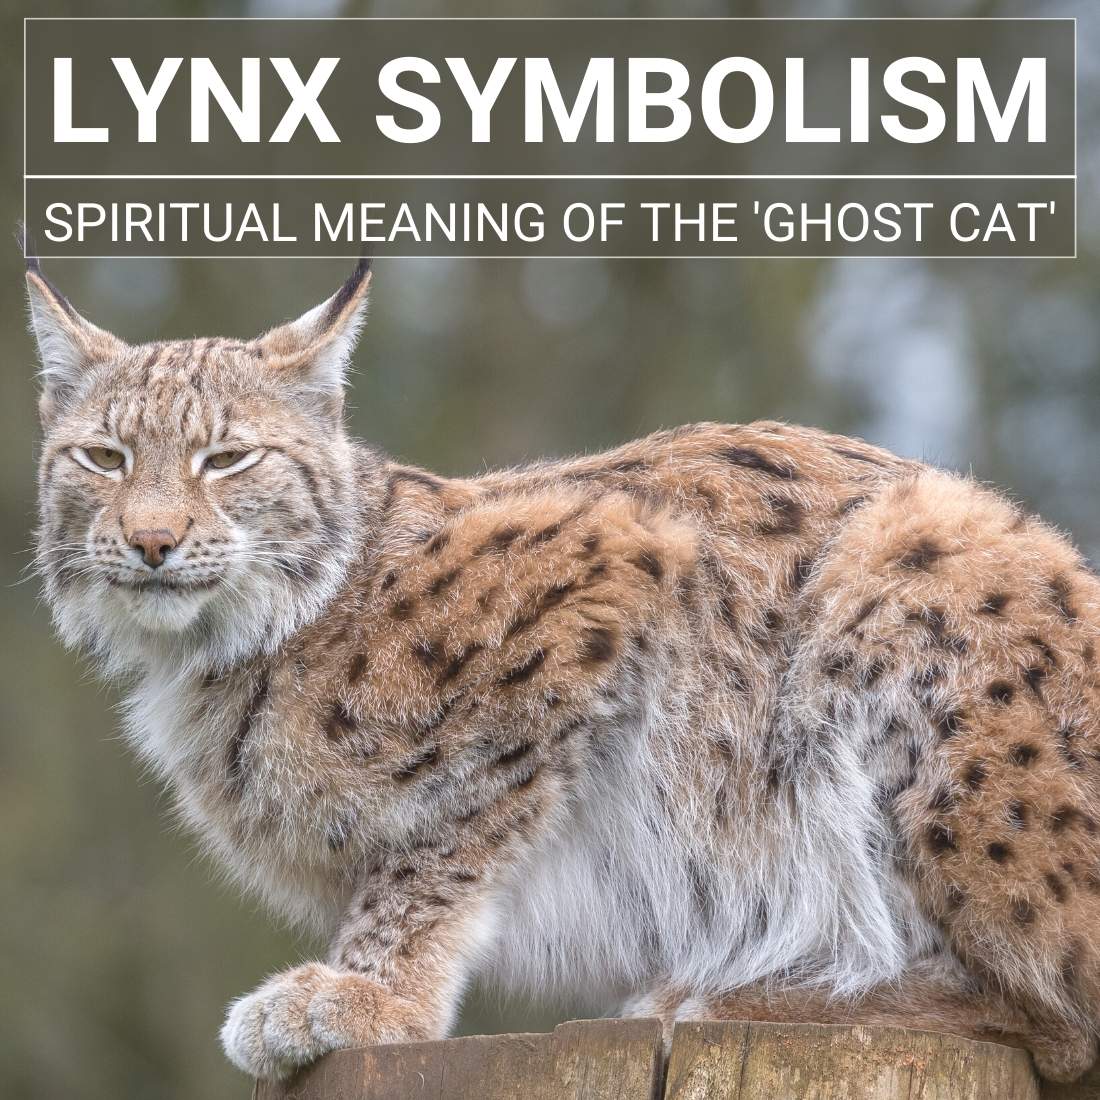 Lynx Symbolism: The Spiritual Meaning Of The 'Ghost Cat'